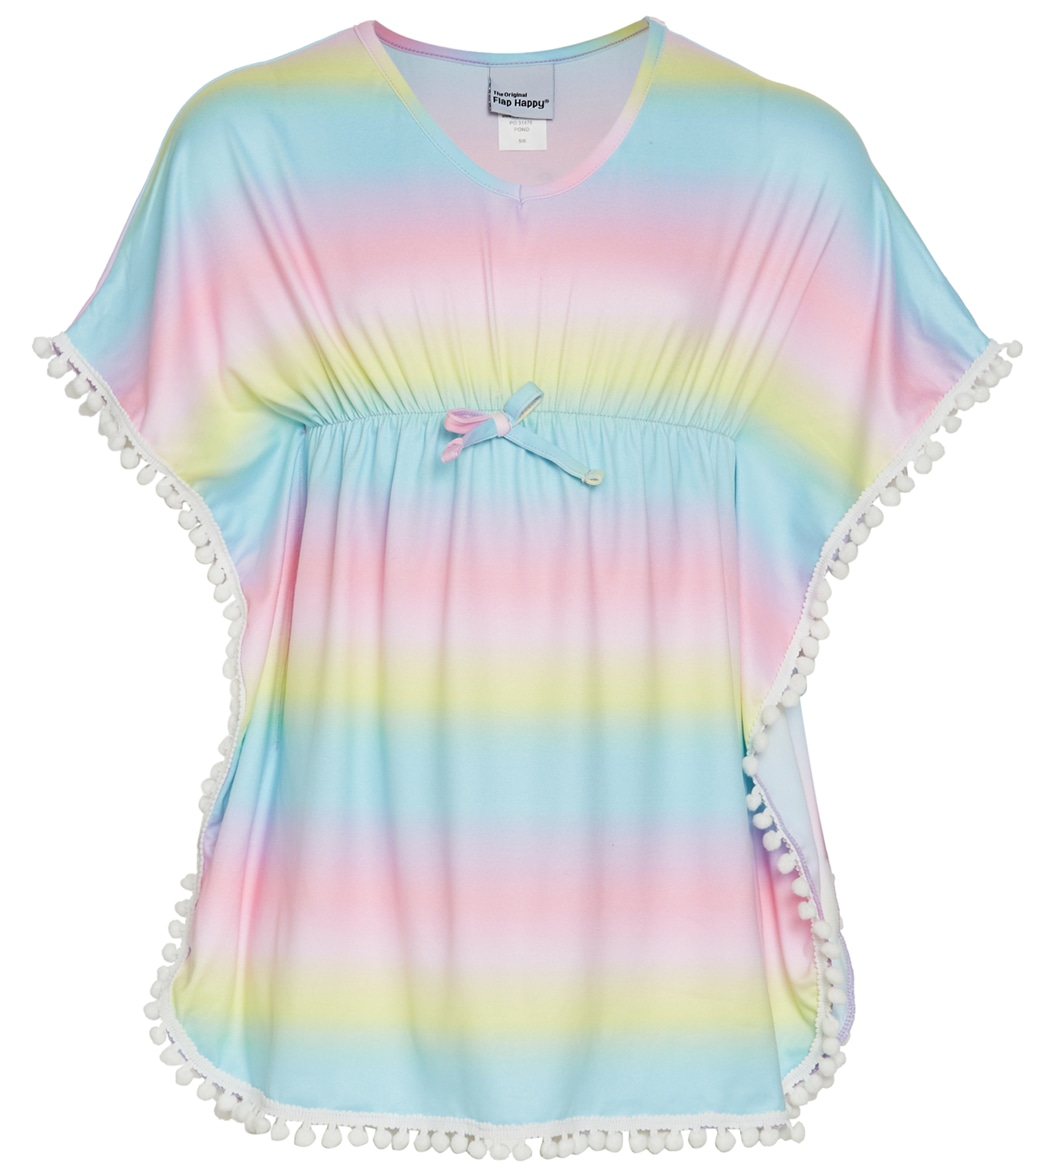 Flap Happy Girls' Rainbow Ombre Kaia Beach Upf 50+ Cover Up Dress Baby Toddler - 12M-18M - Swimoutlet.com